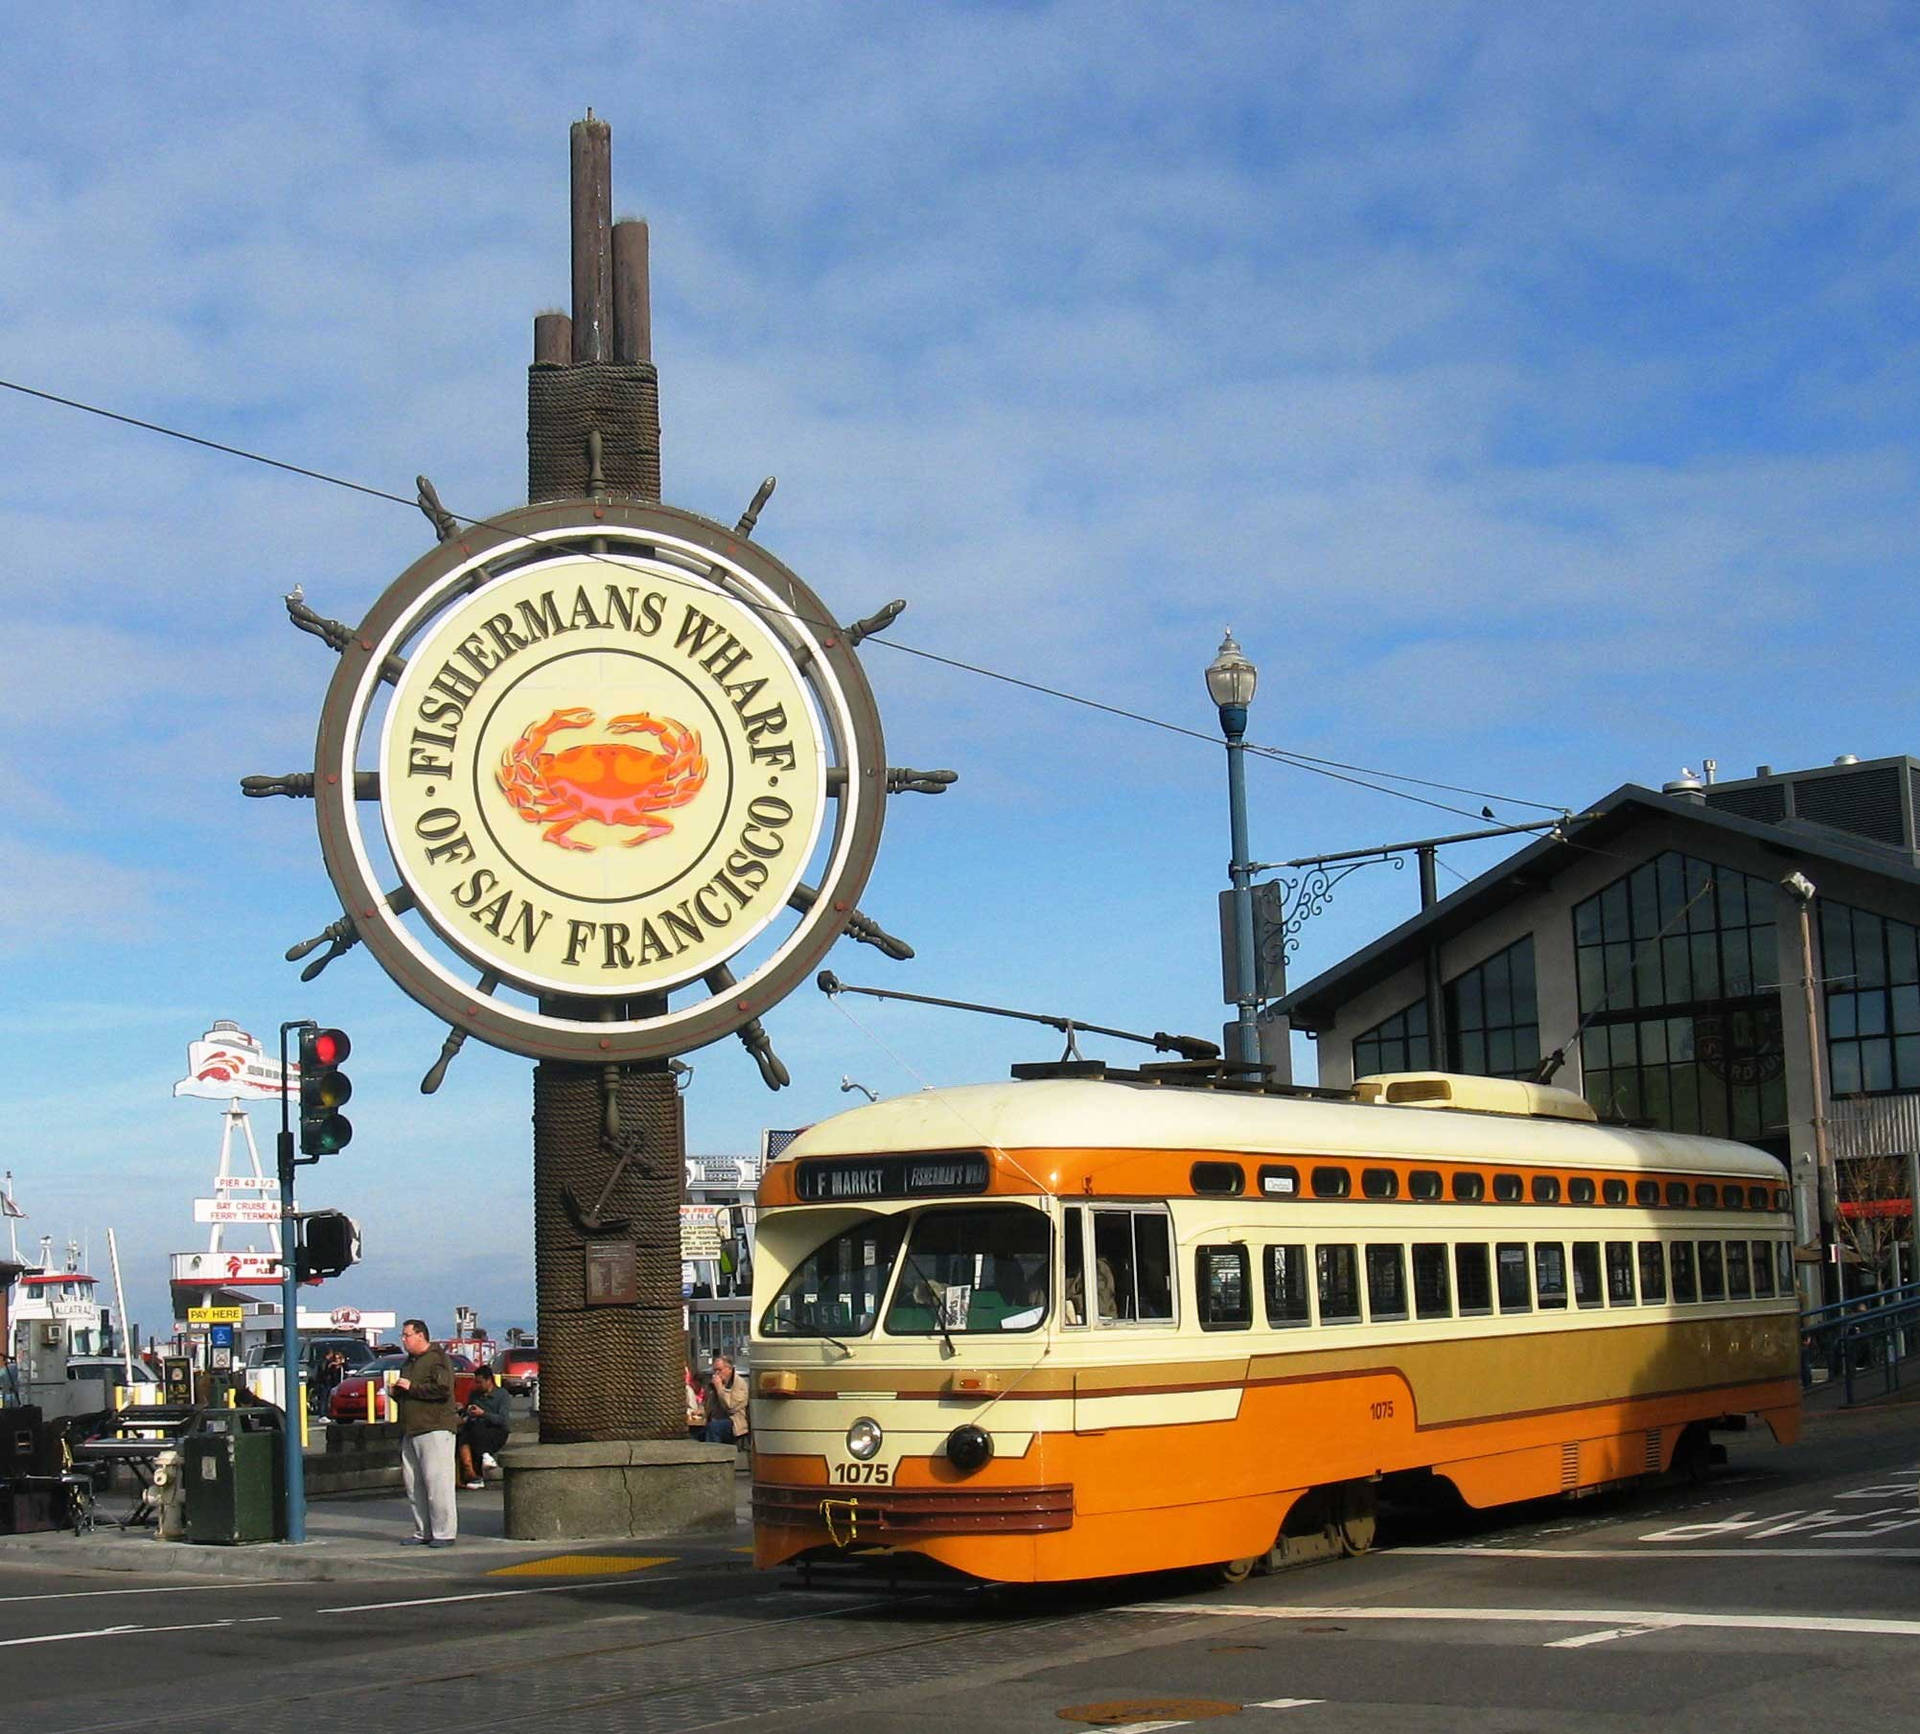 Tram Passing By The Fishermans Wharf Wallpaper